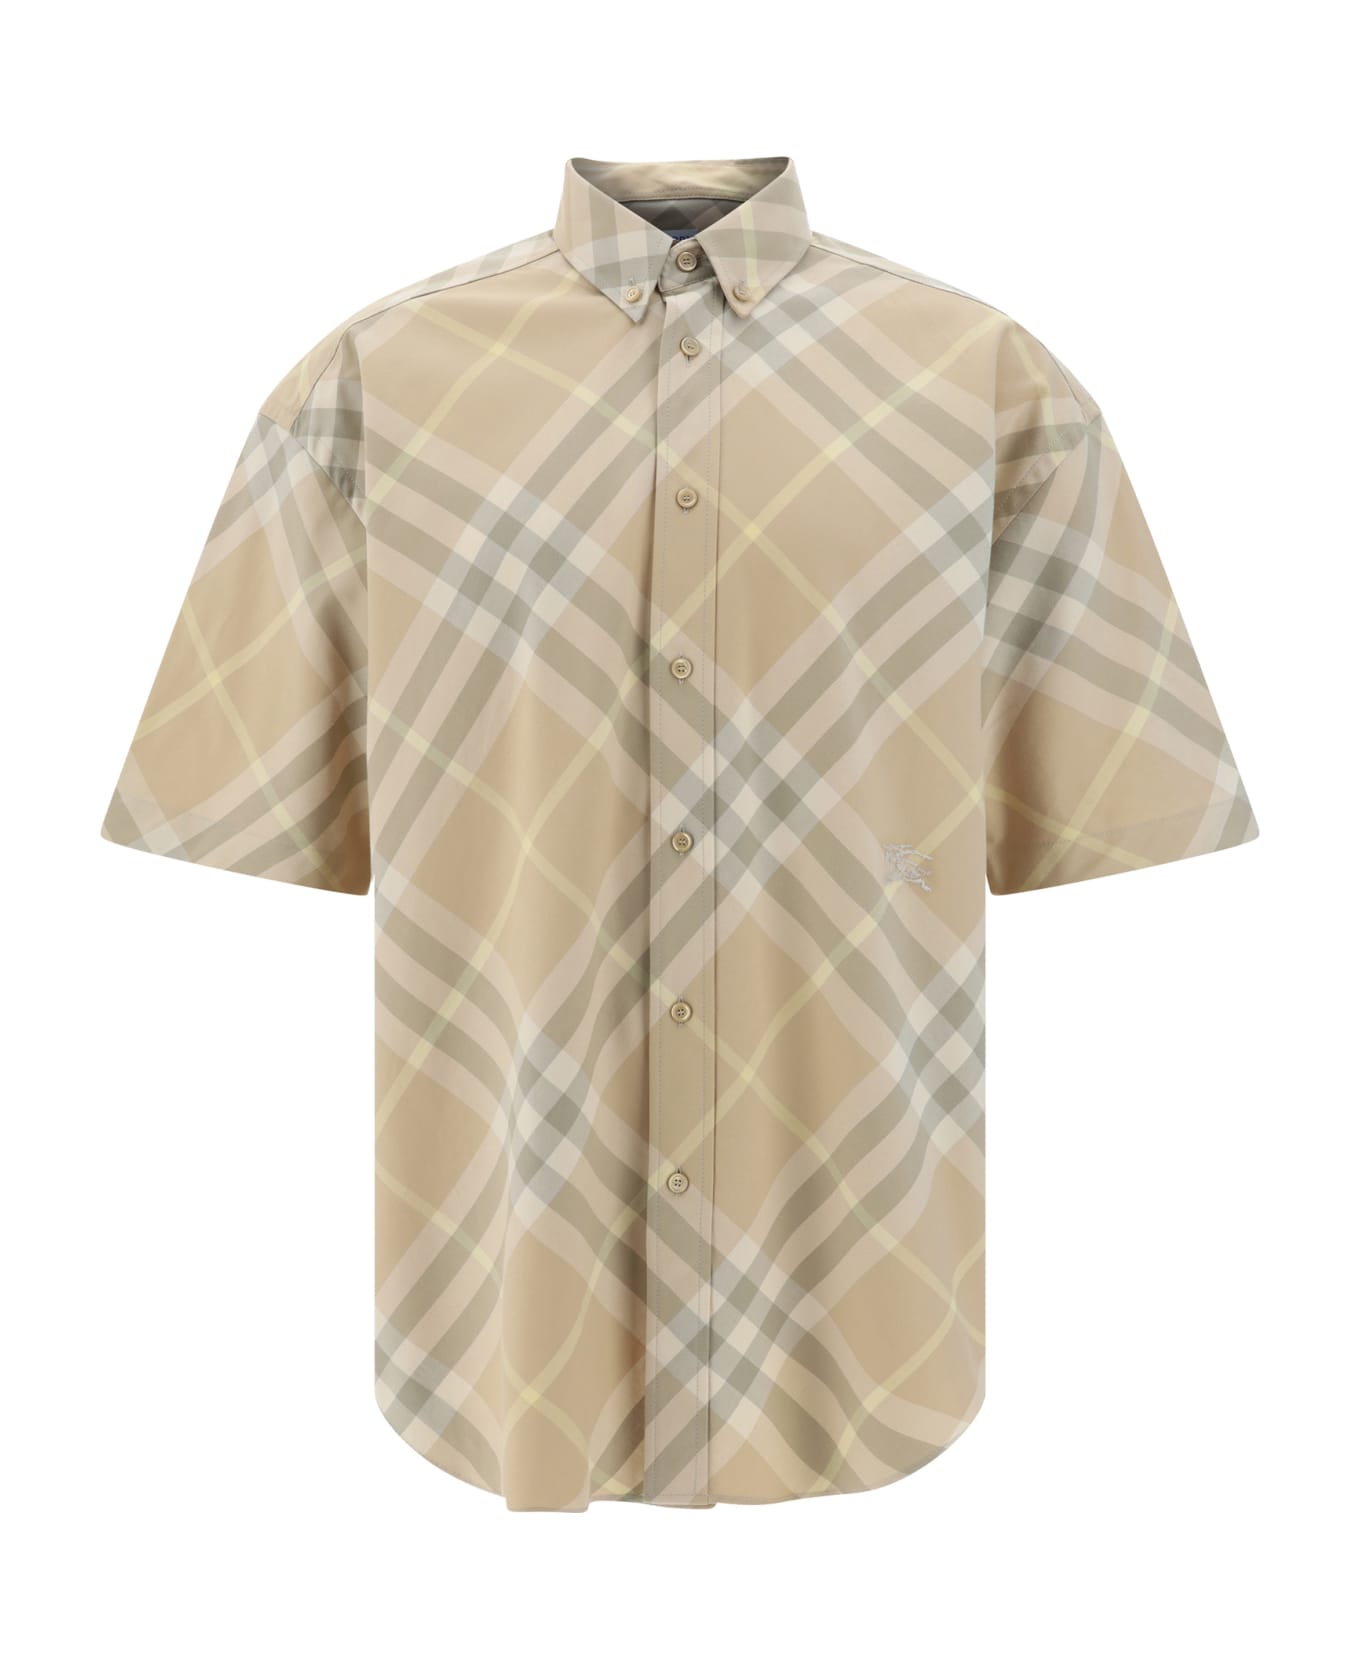 Burberry Casual Shirt - Flax Ip Check